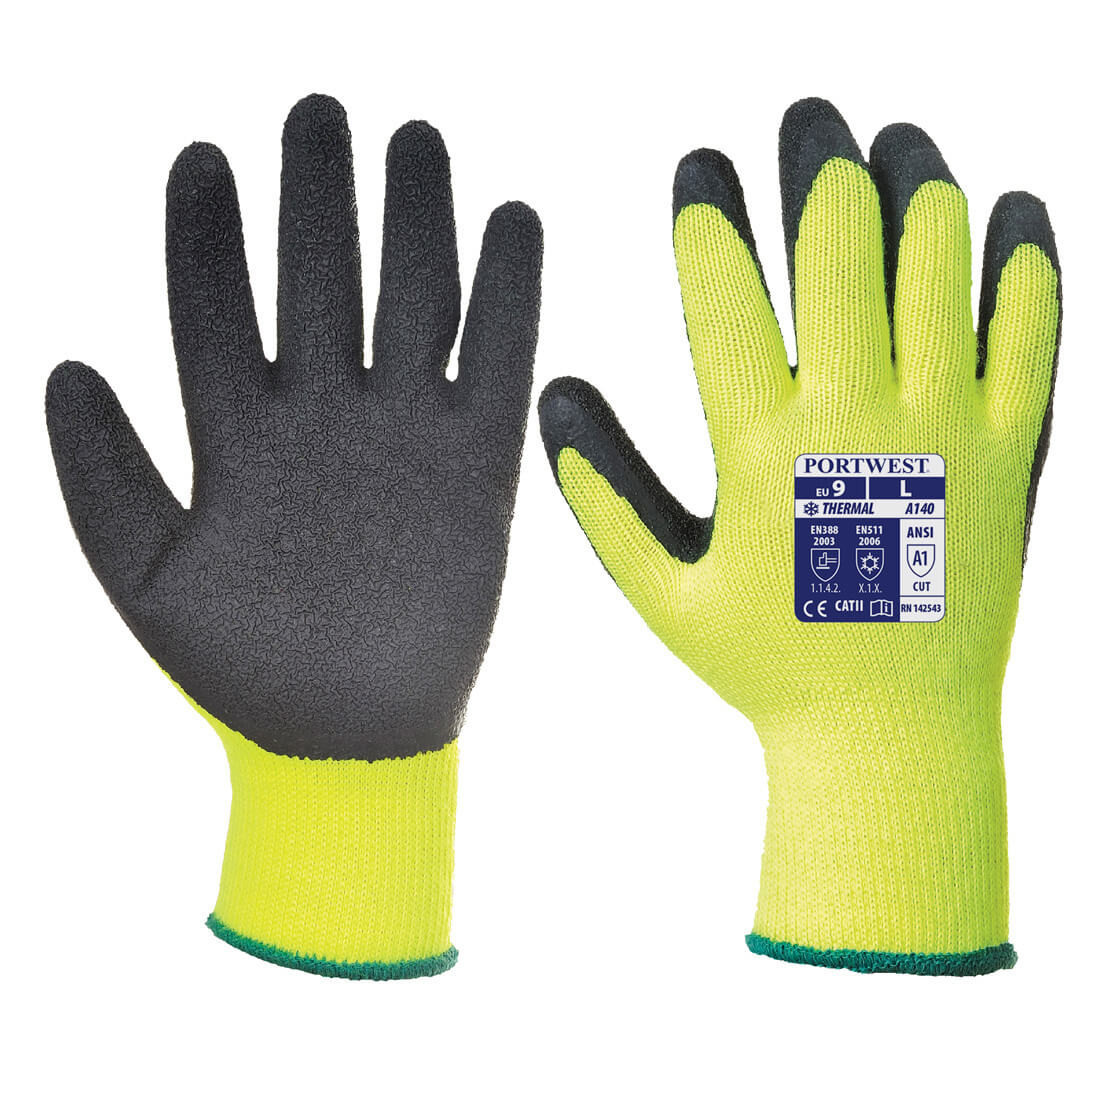 Thermal Grip Glove - Personal protection